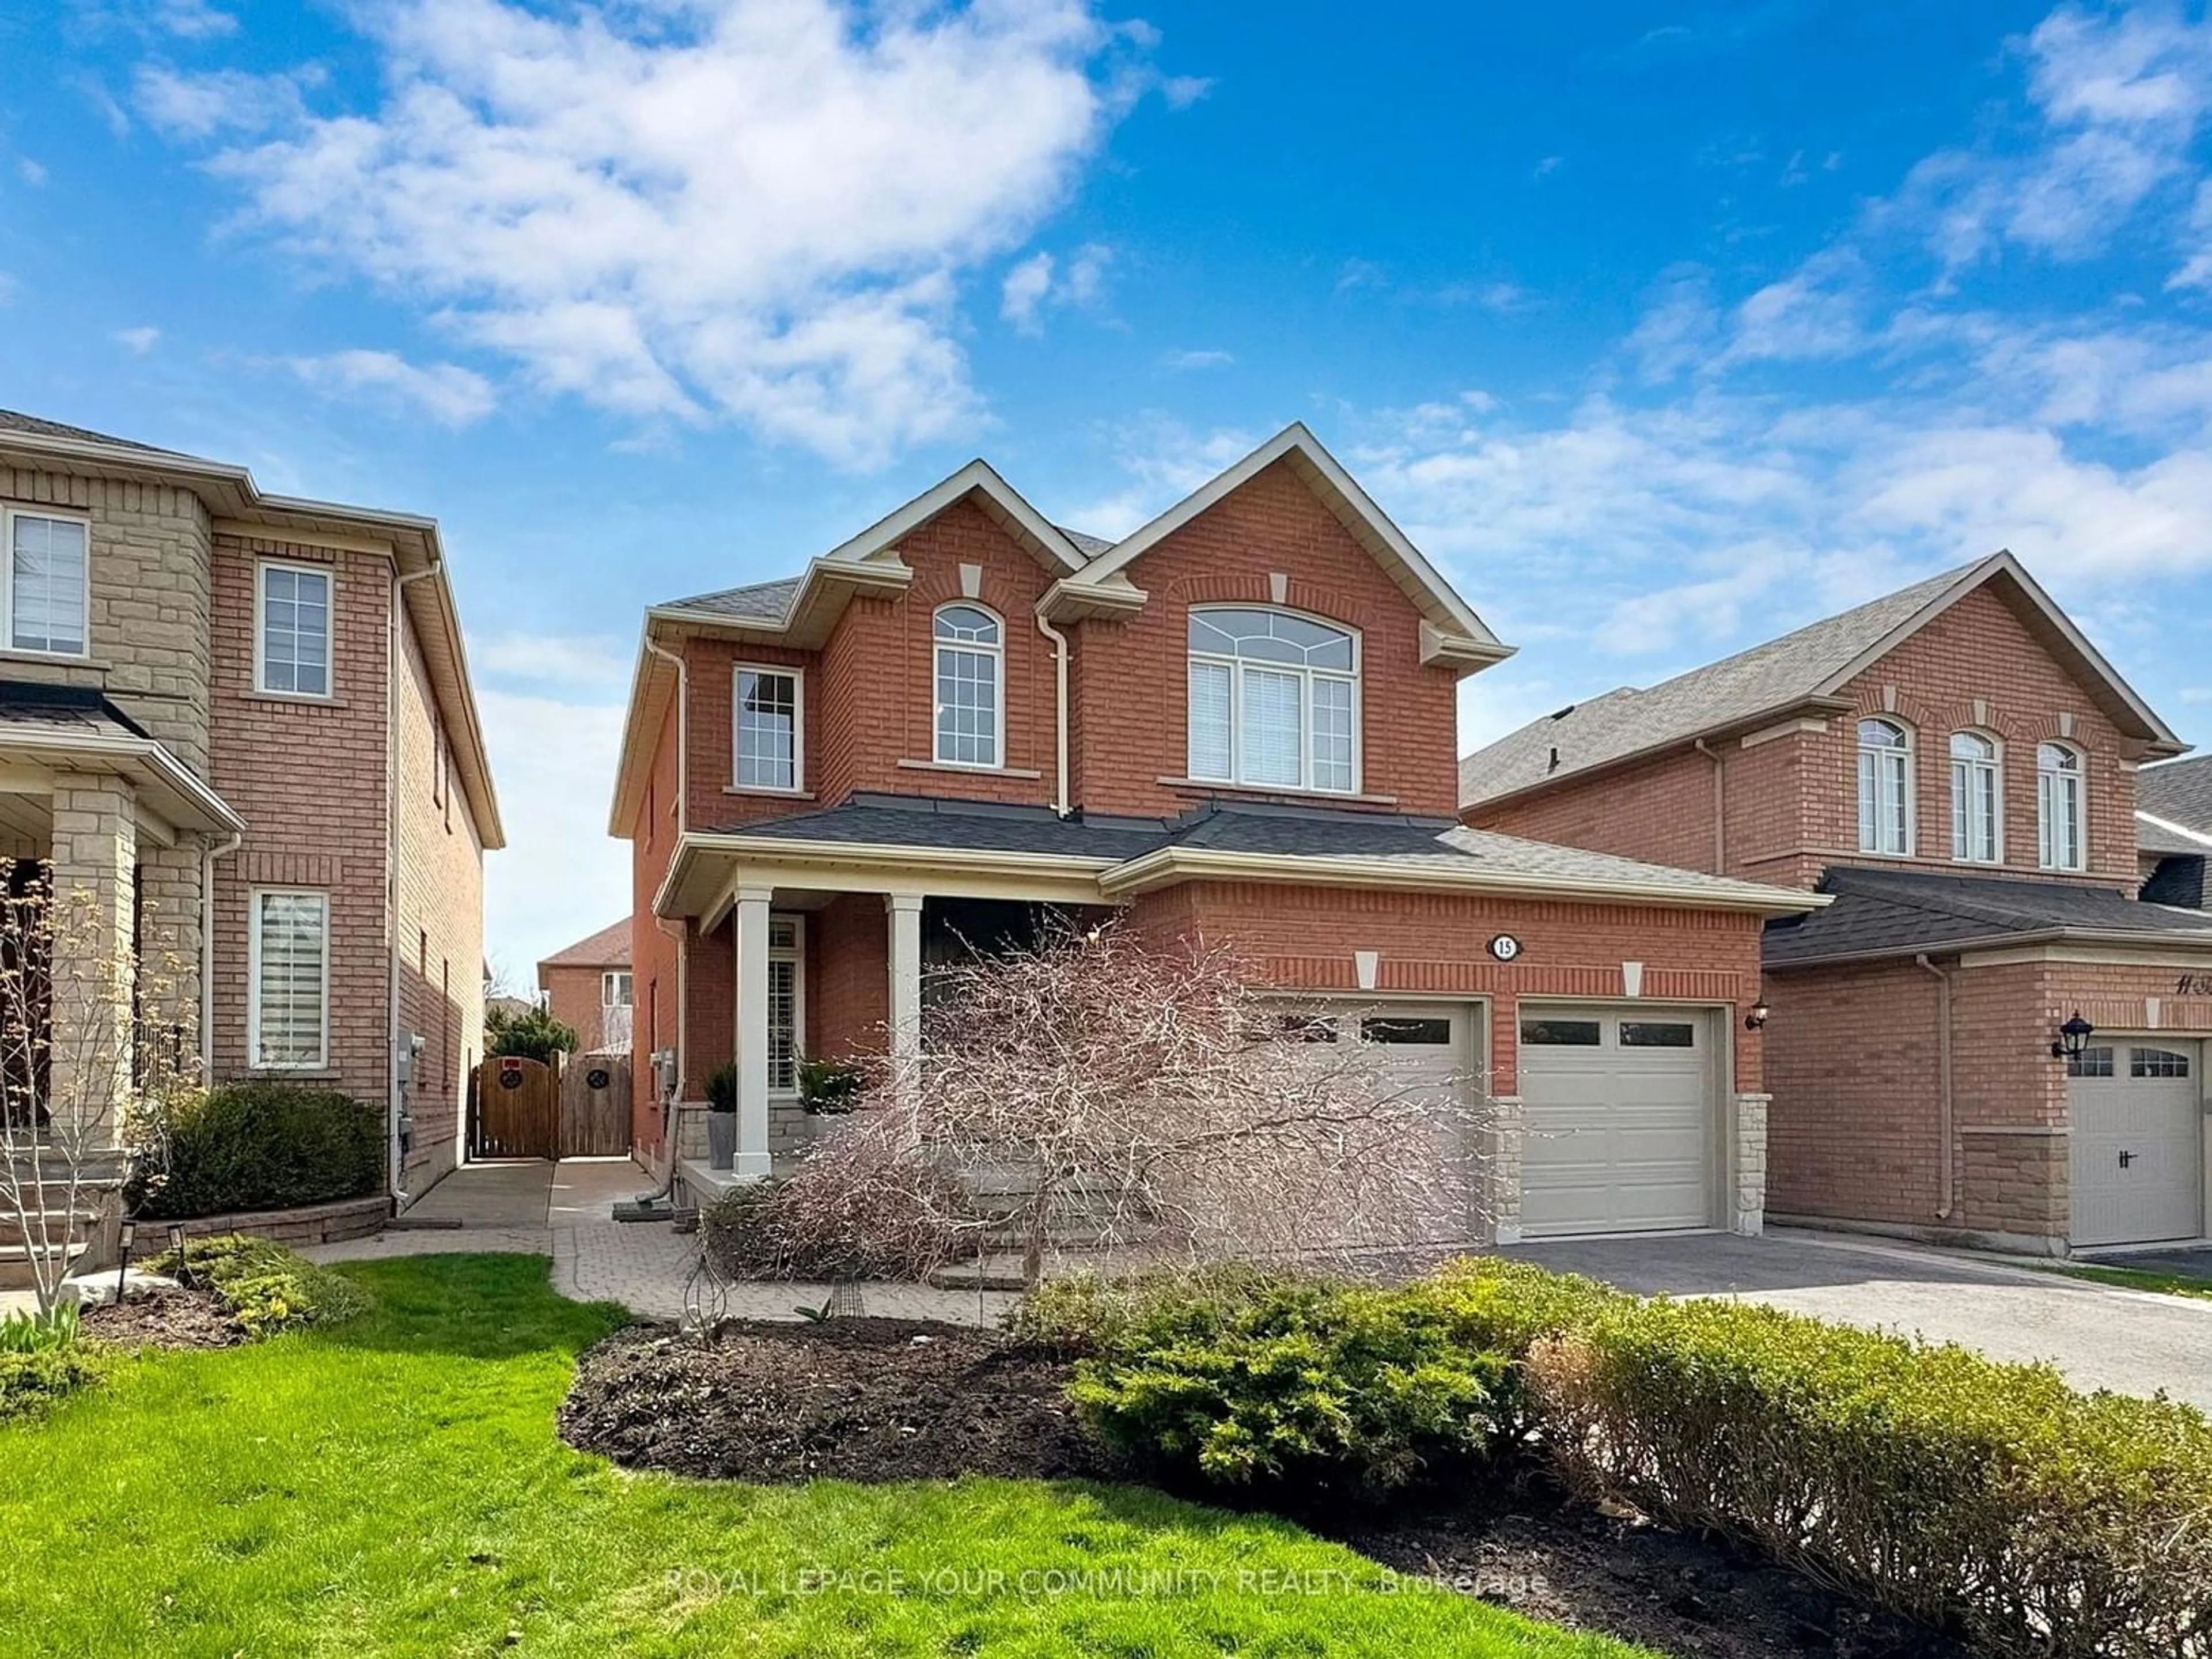 Home with brick exterior material for 15 Tayside Ave, Vaughan Ontario L6A 3M6